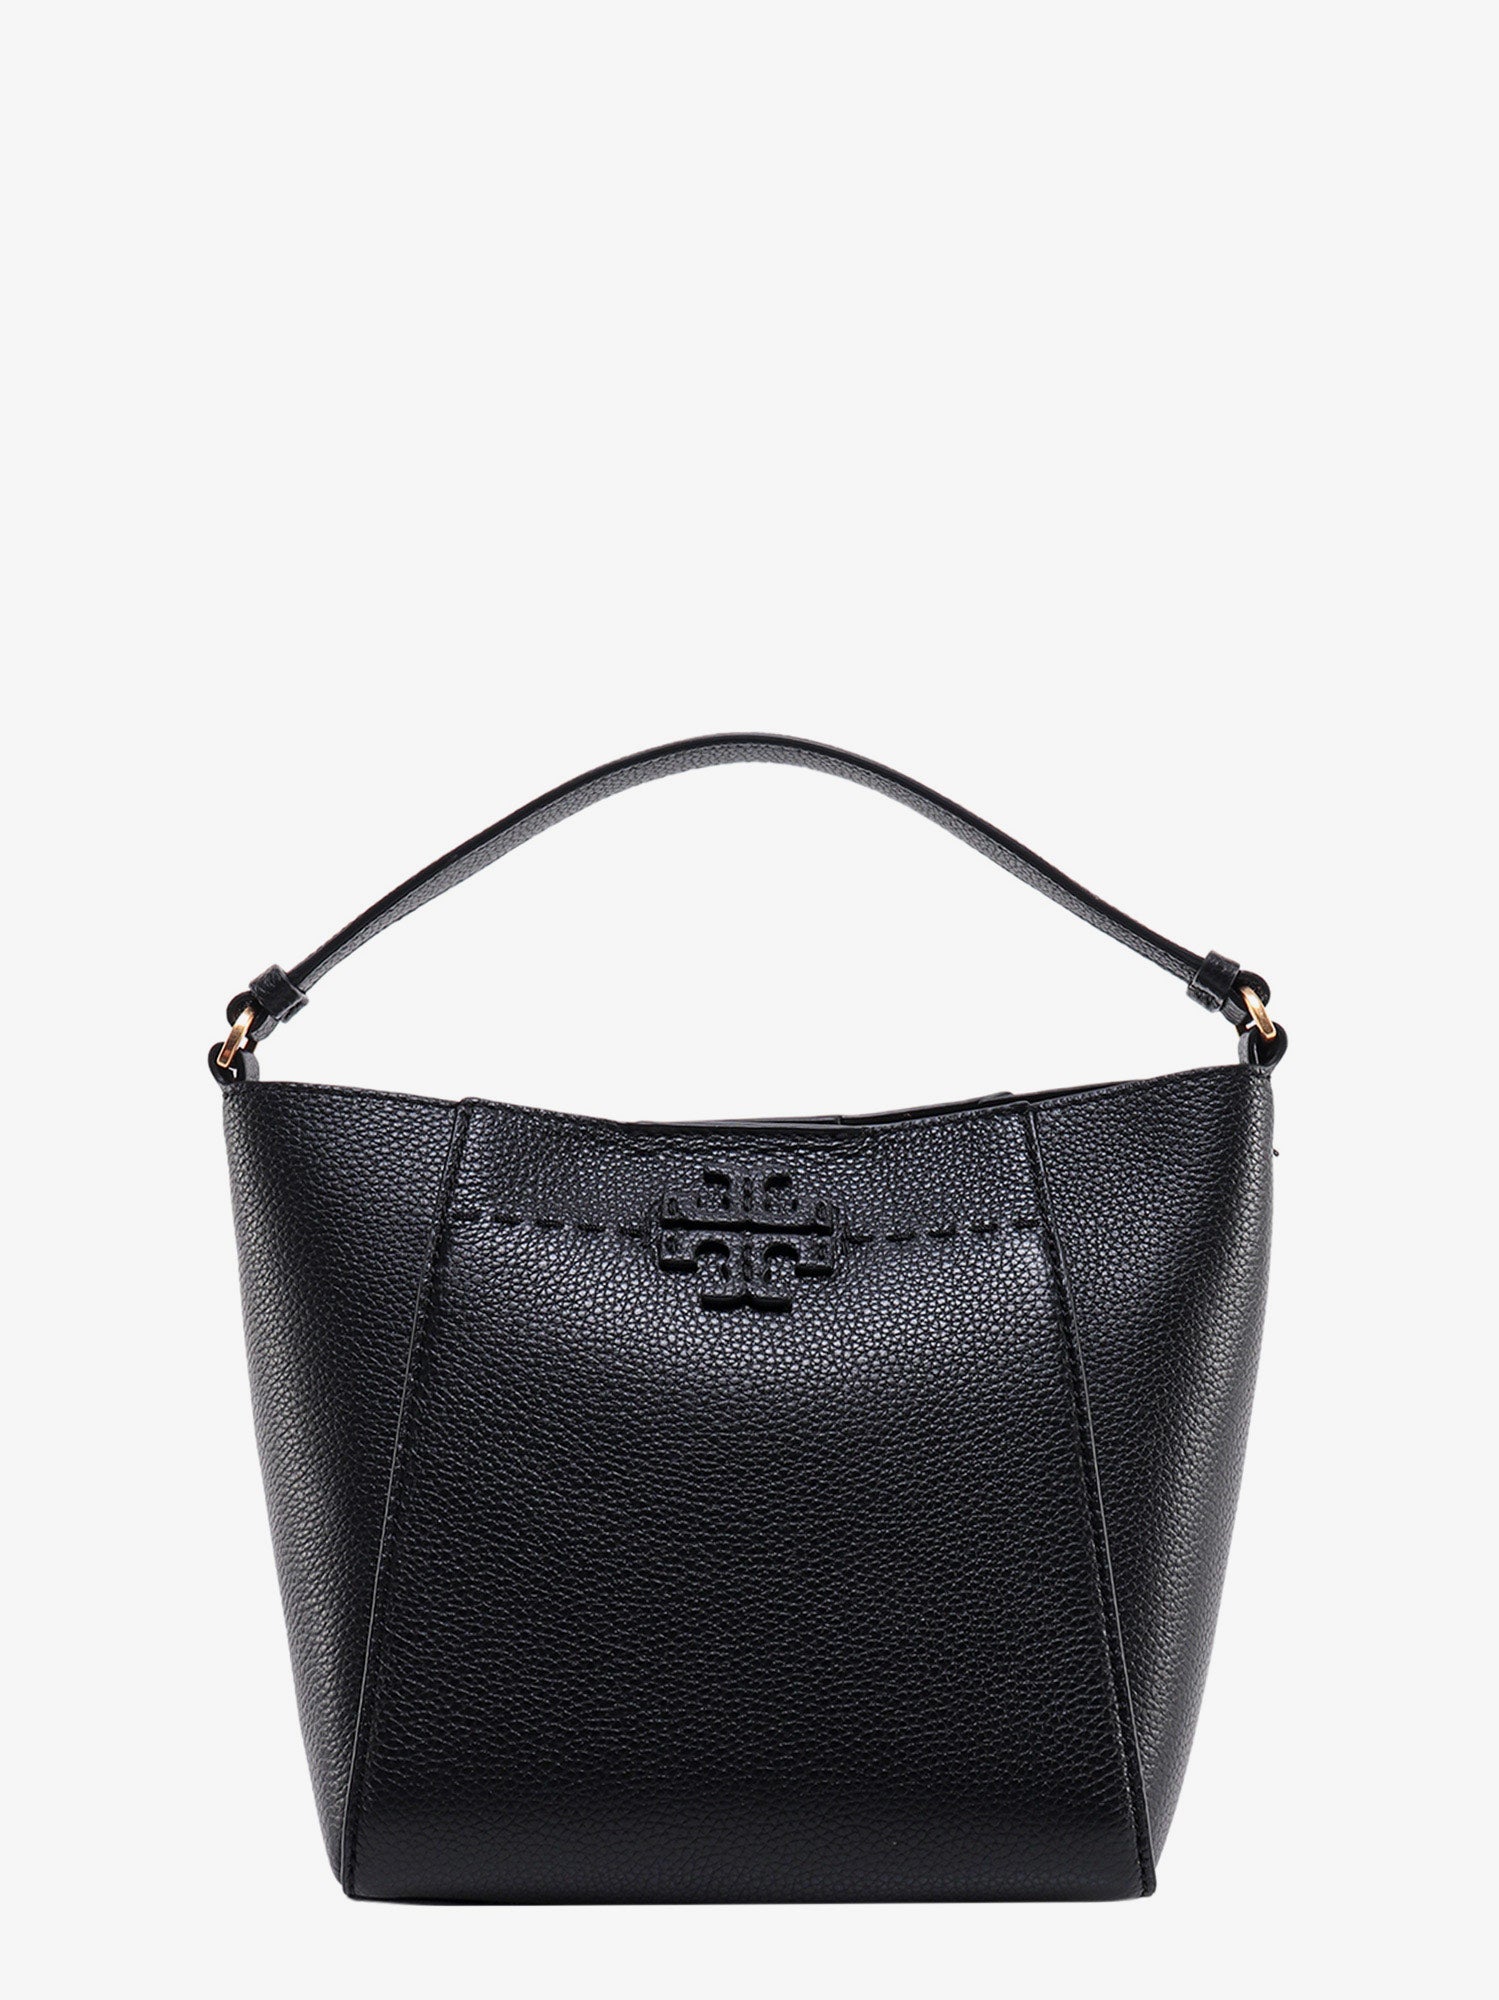 MCGRAW - TORY BURCH - Donna product